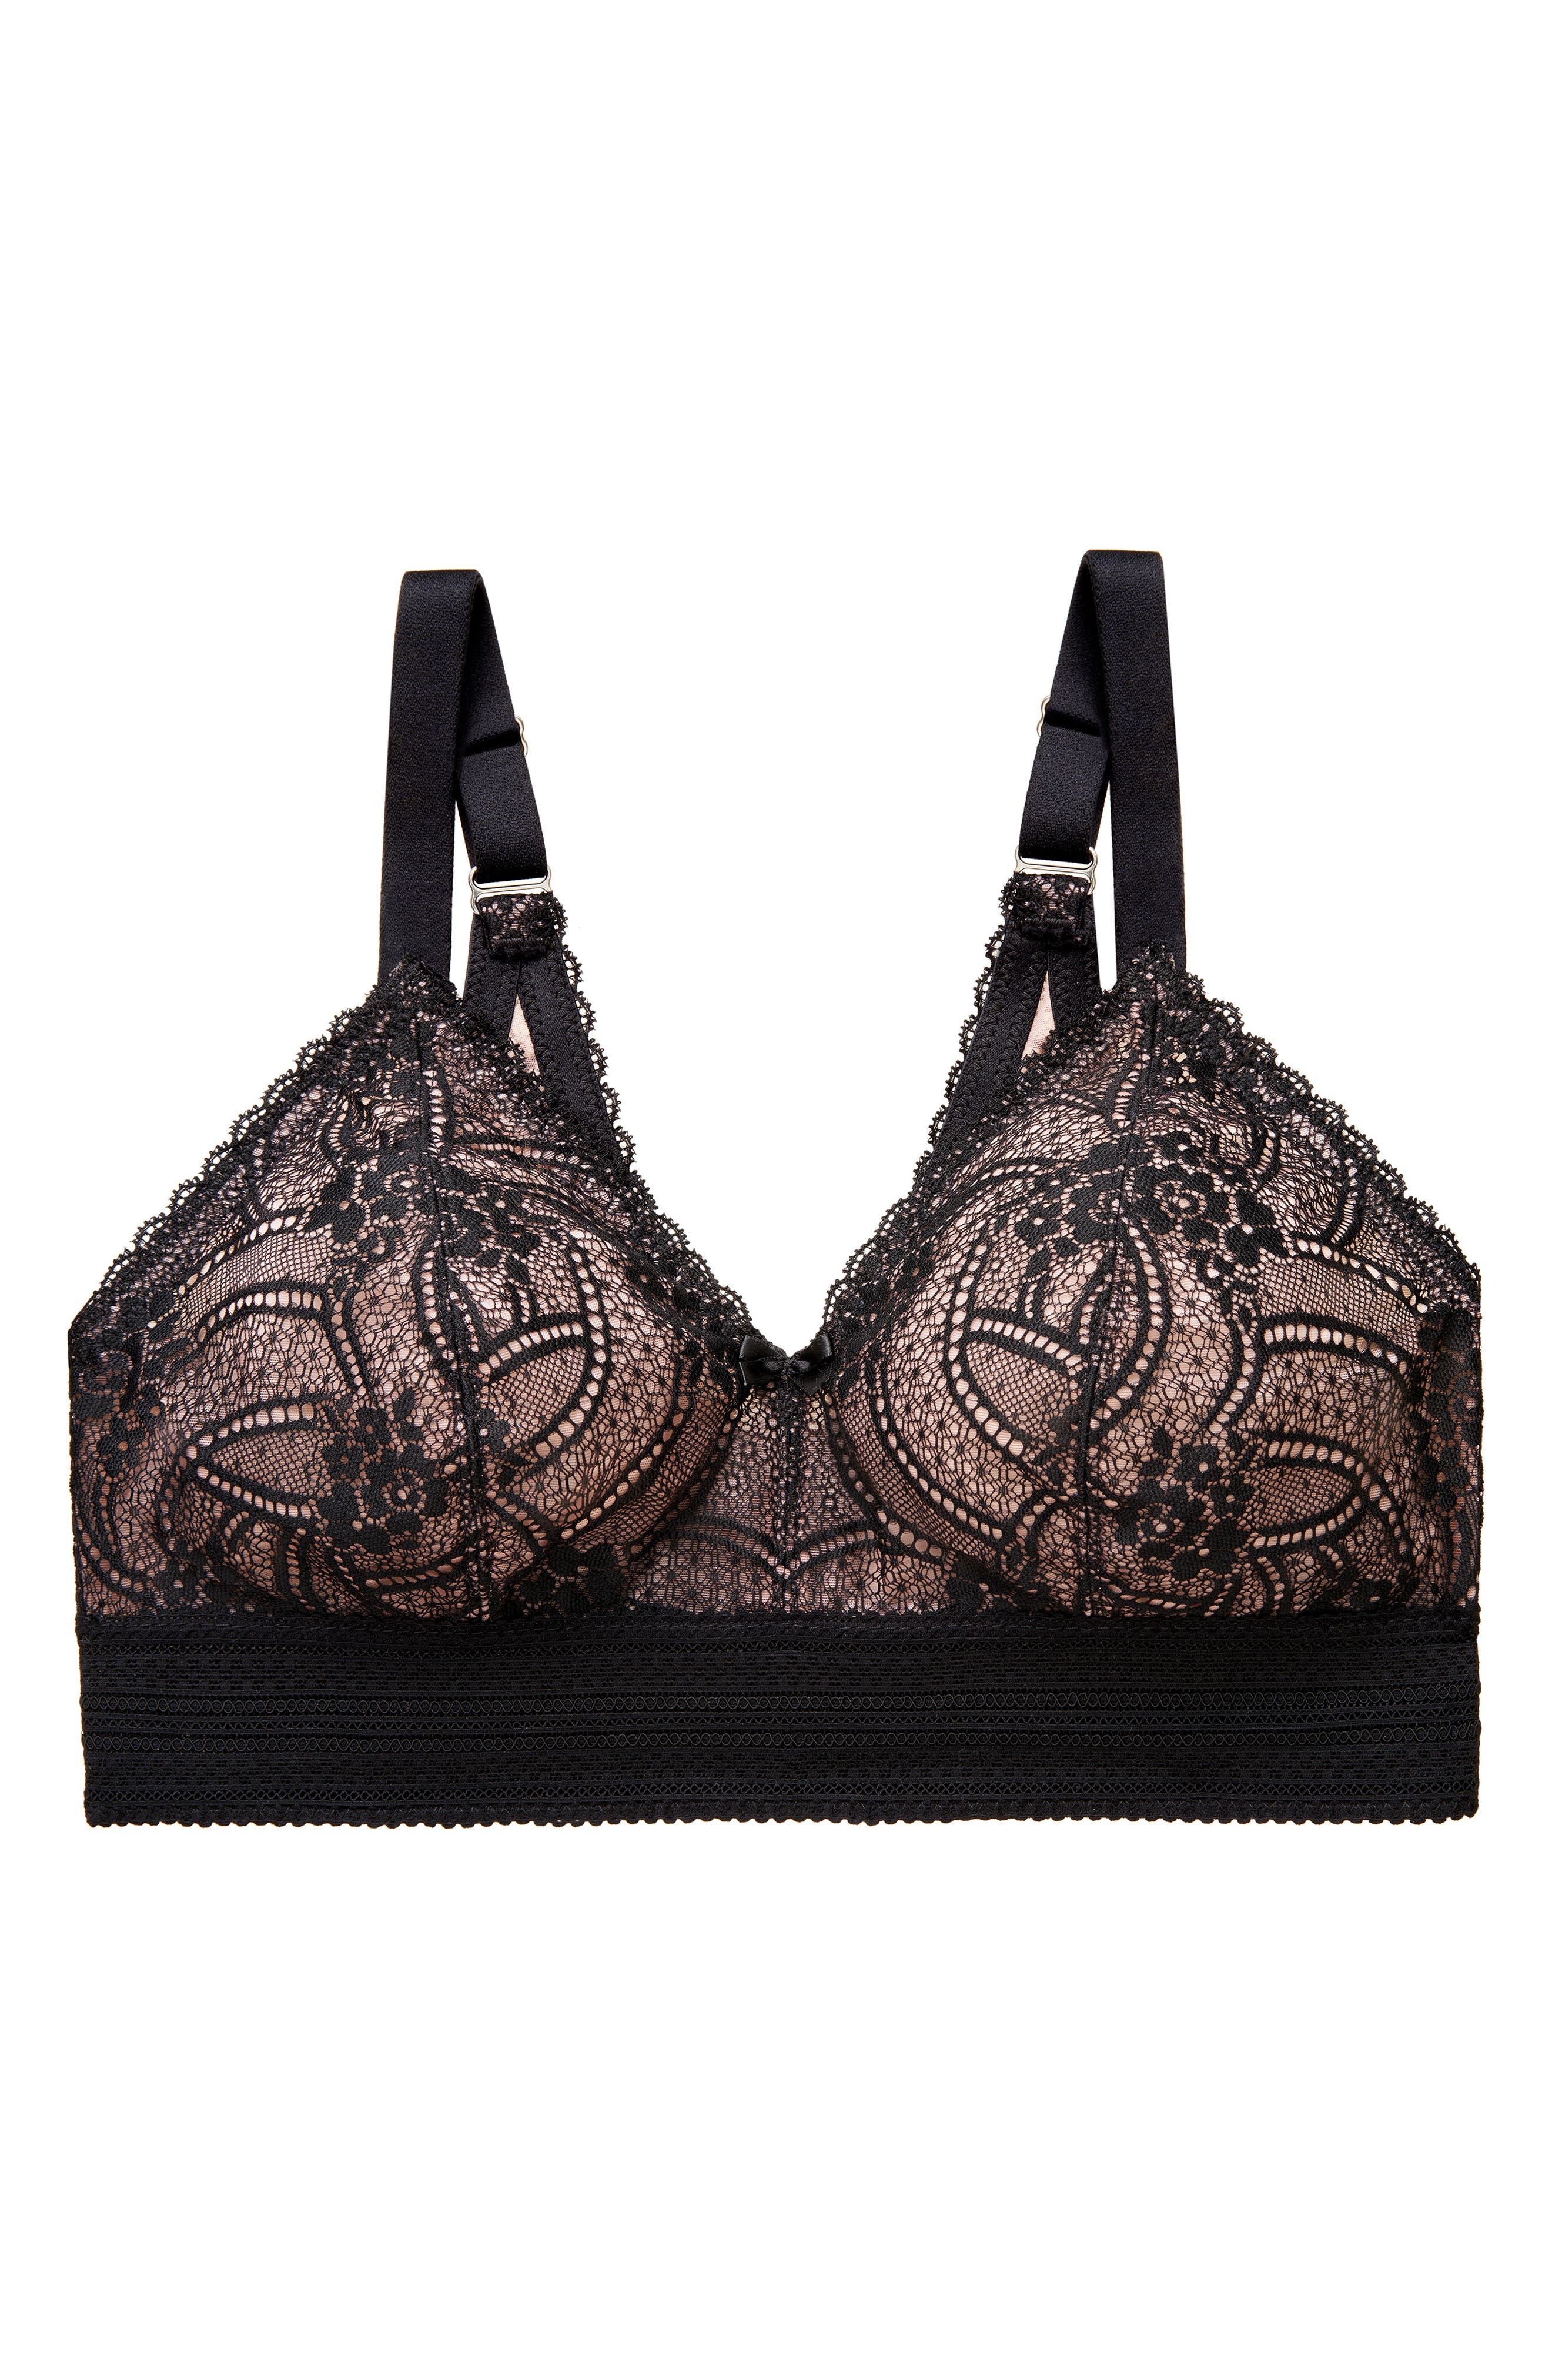 Gramercy Black Lace Bra - Stunning and Supportive